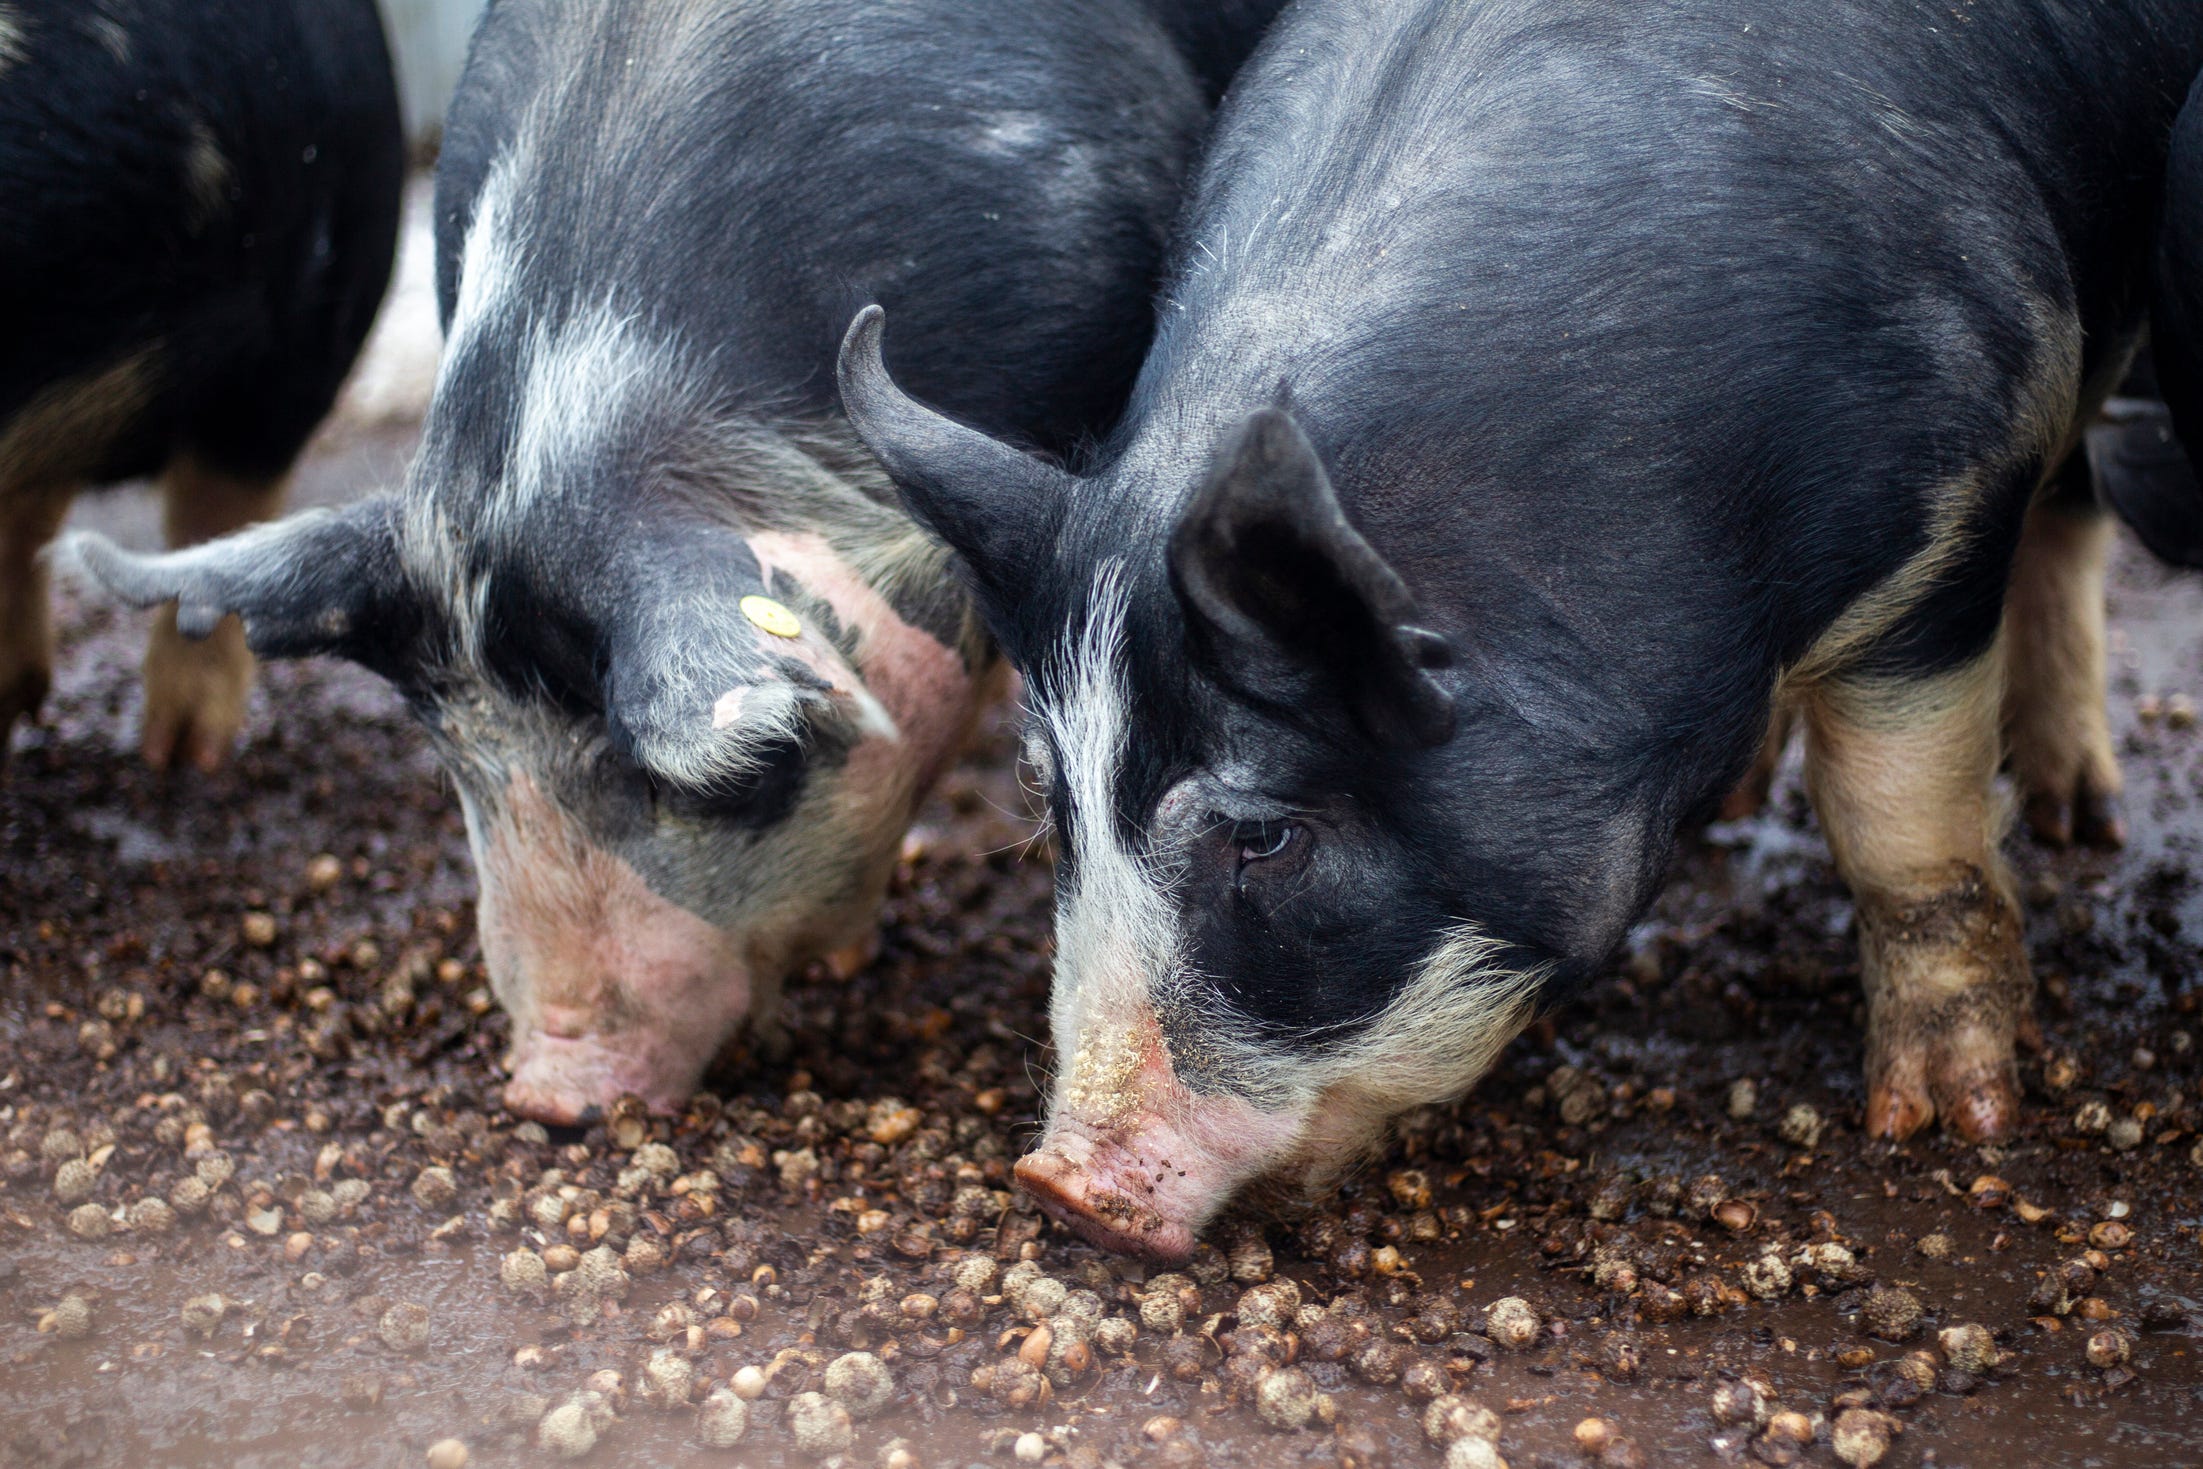 There is no presence of African swine fever yet in the United States, but a press release said an American outbreak could cause significant economic losses.